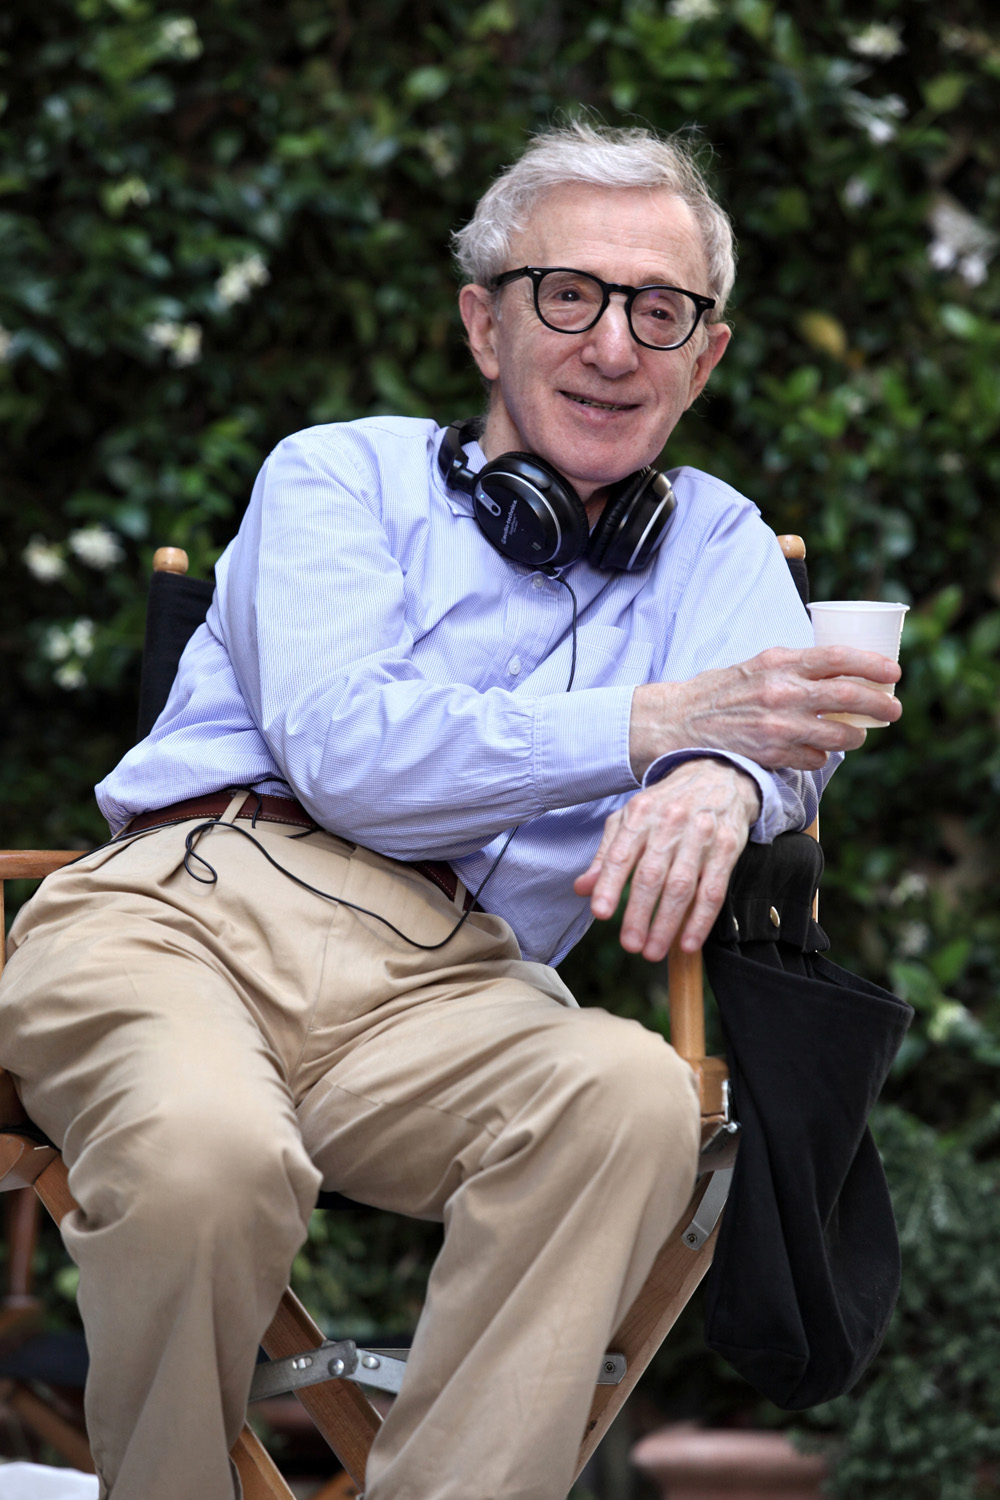 Woody Allen on Aging and His Roles American Profile